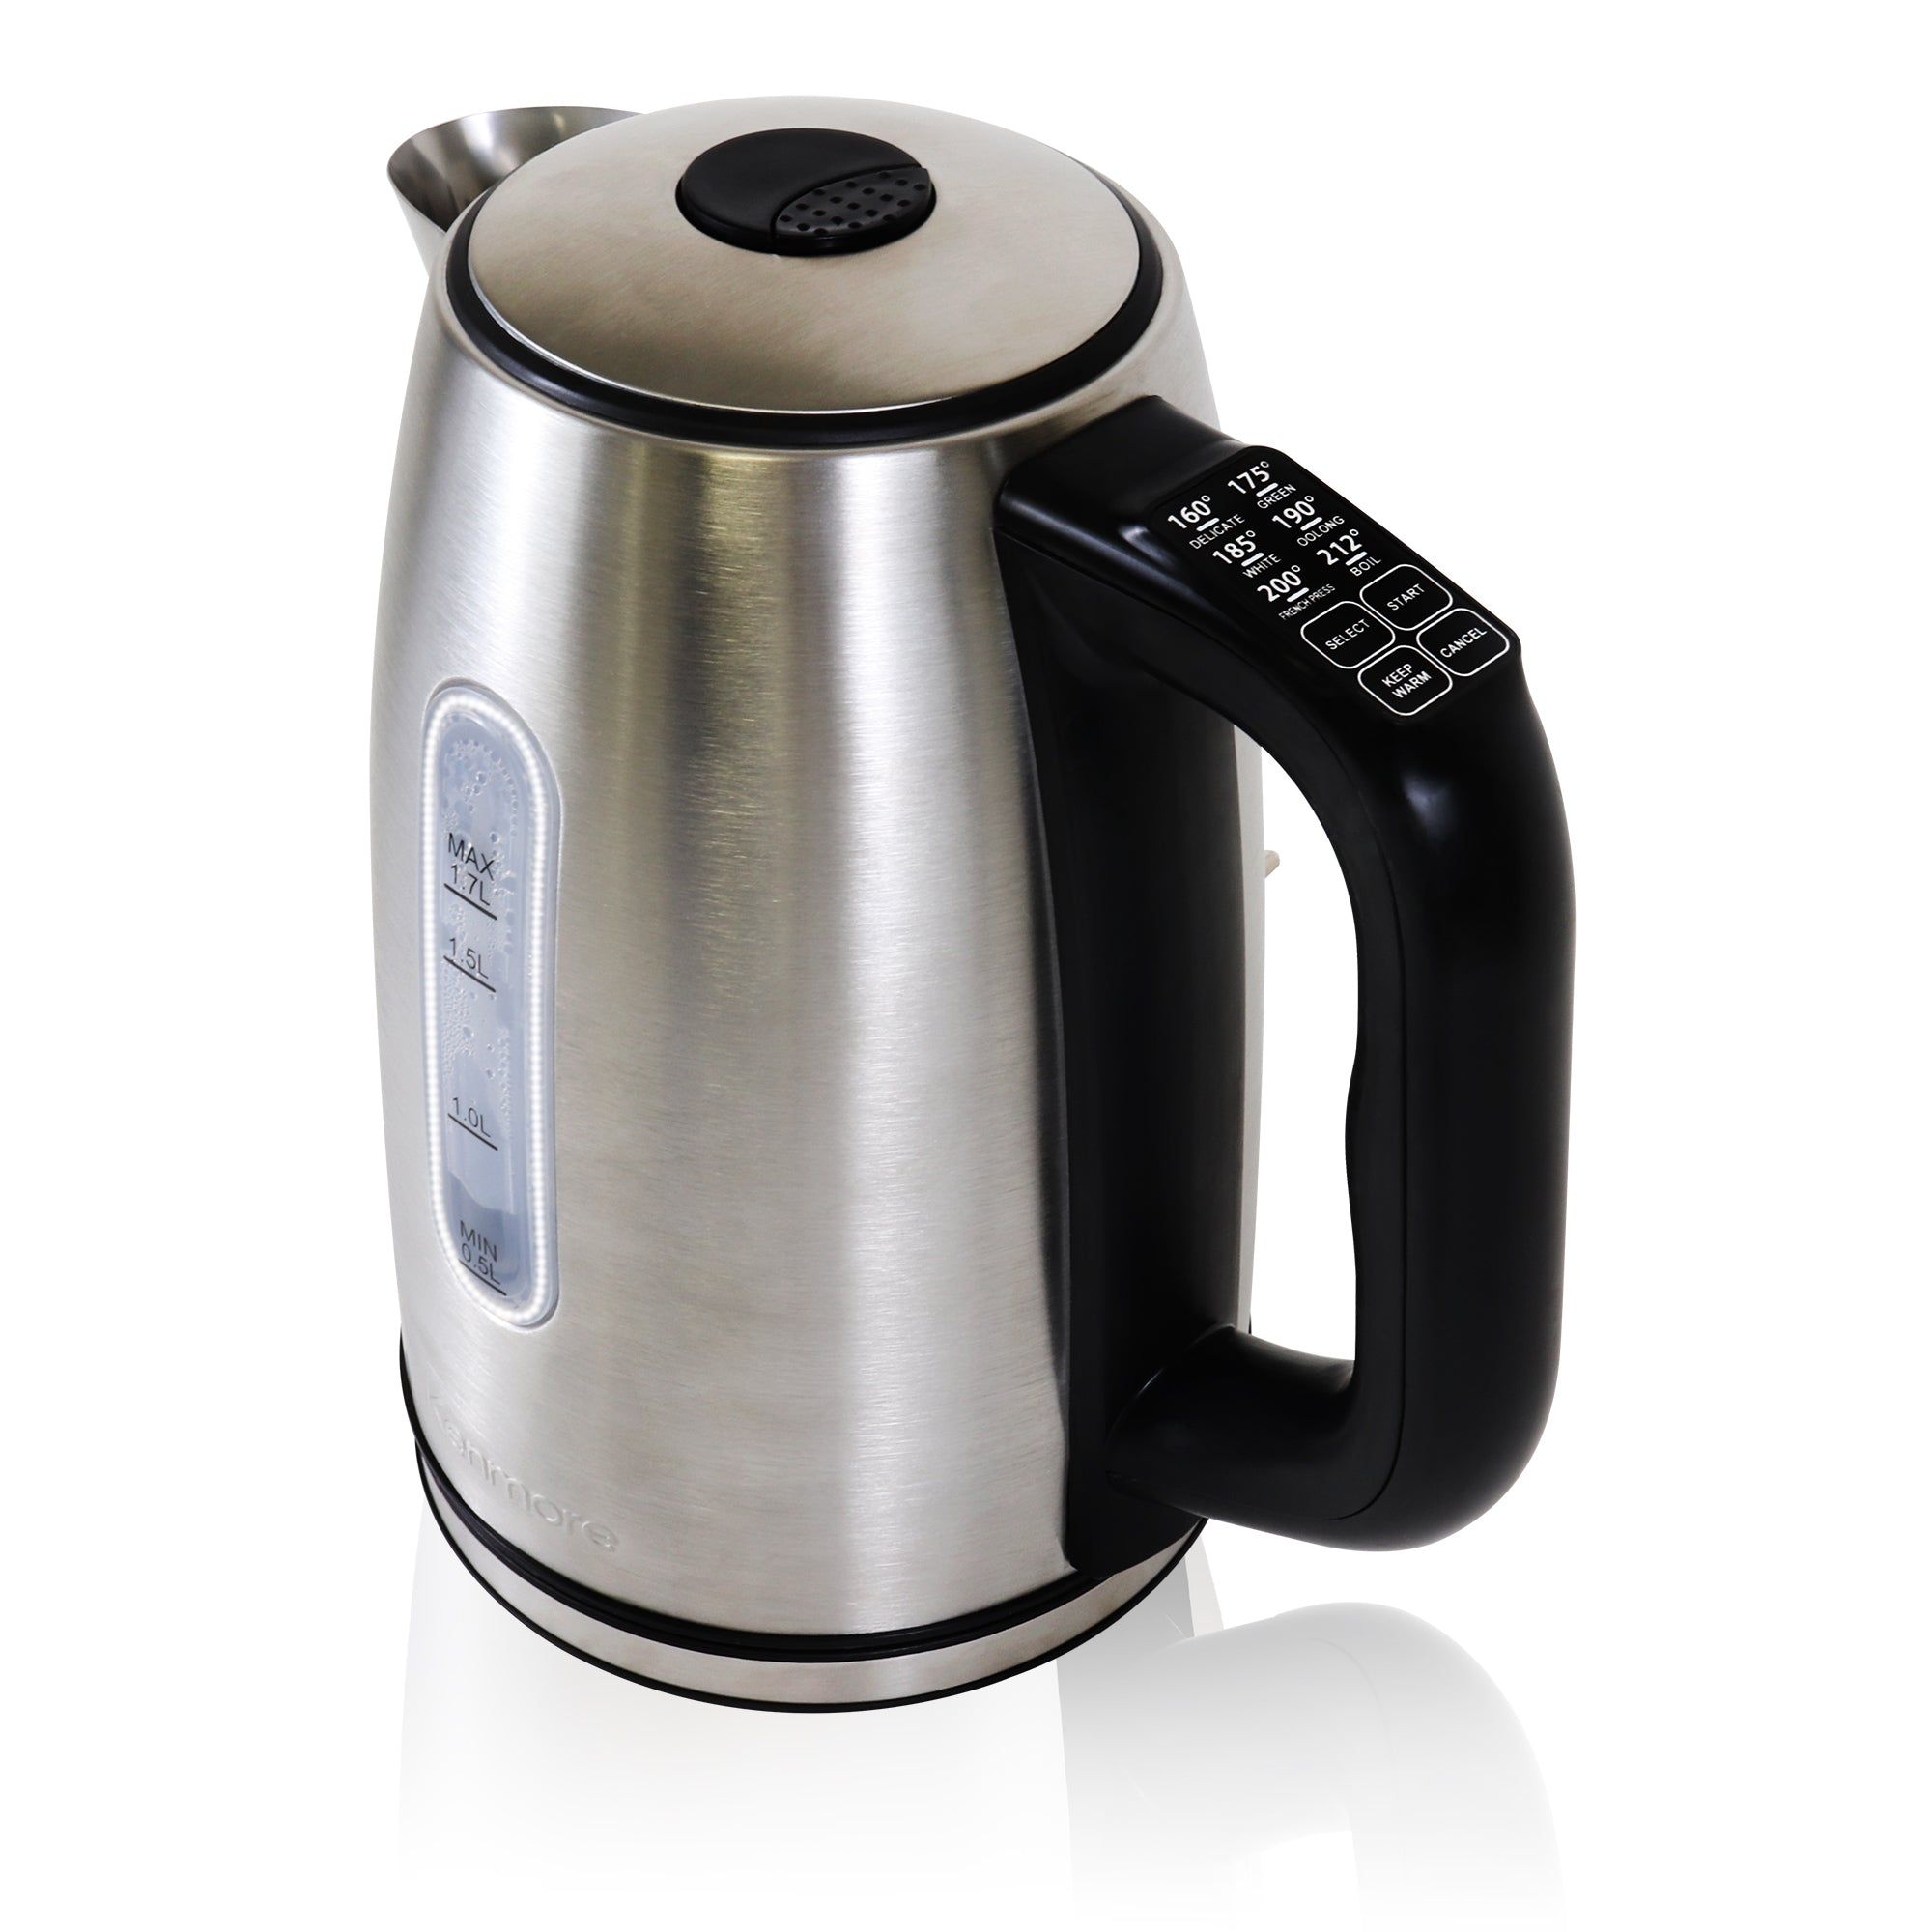 Kenmore cordless kettle on a white background